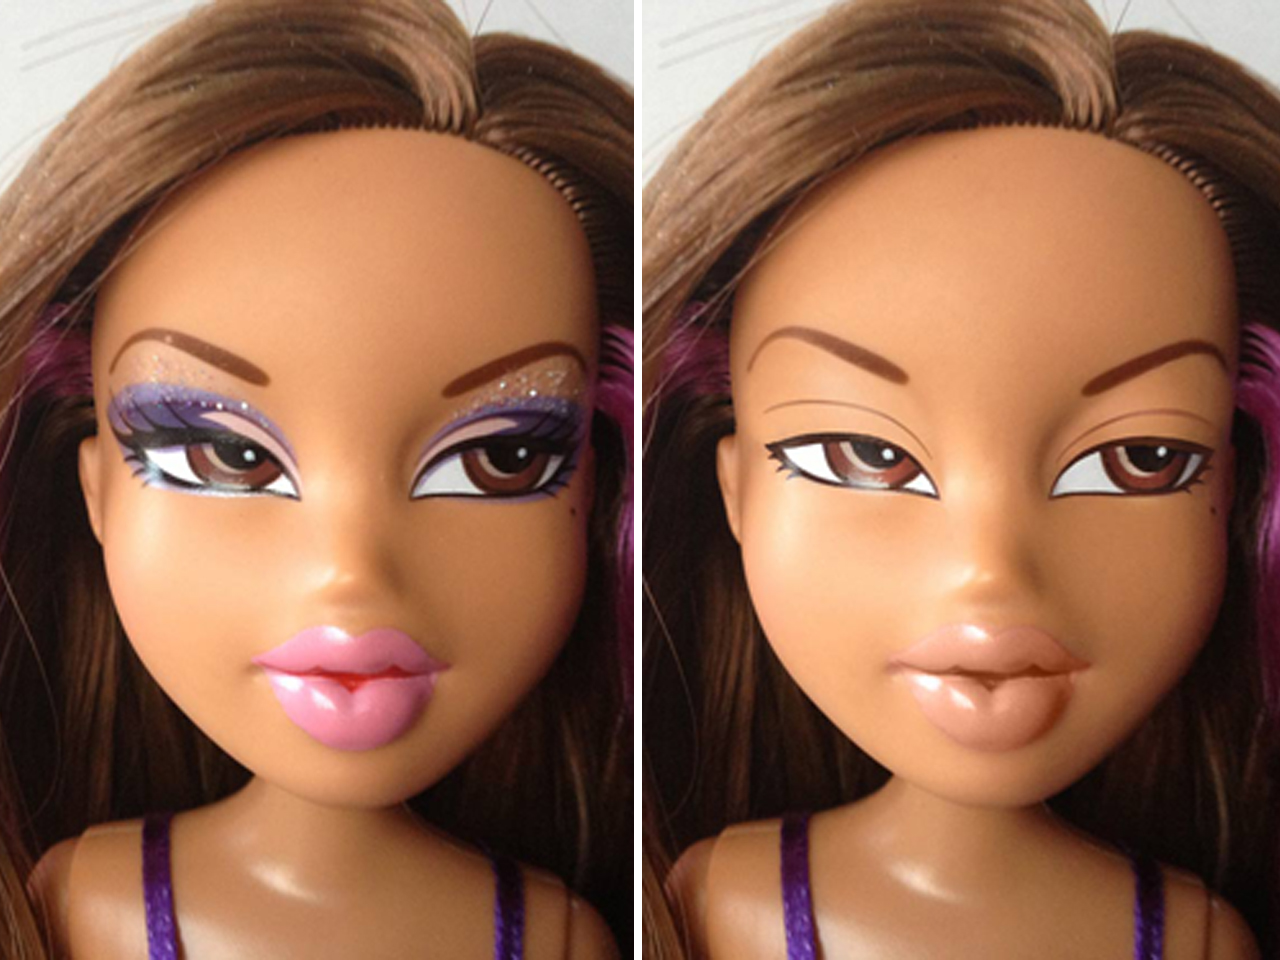 Dolls without makeup: An artist's vision goes viral